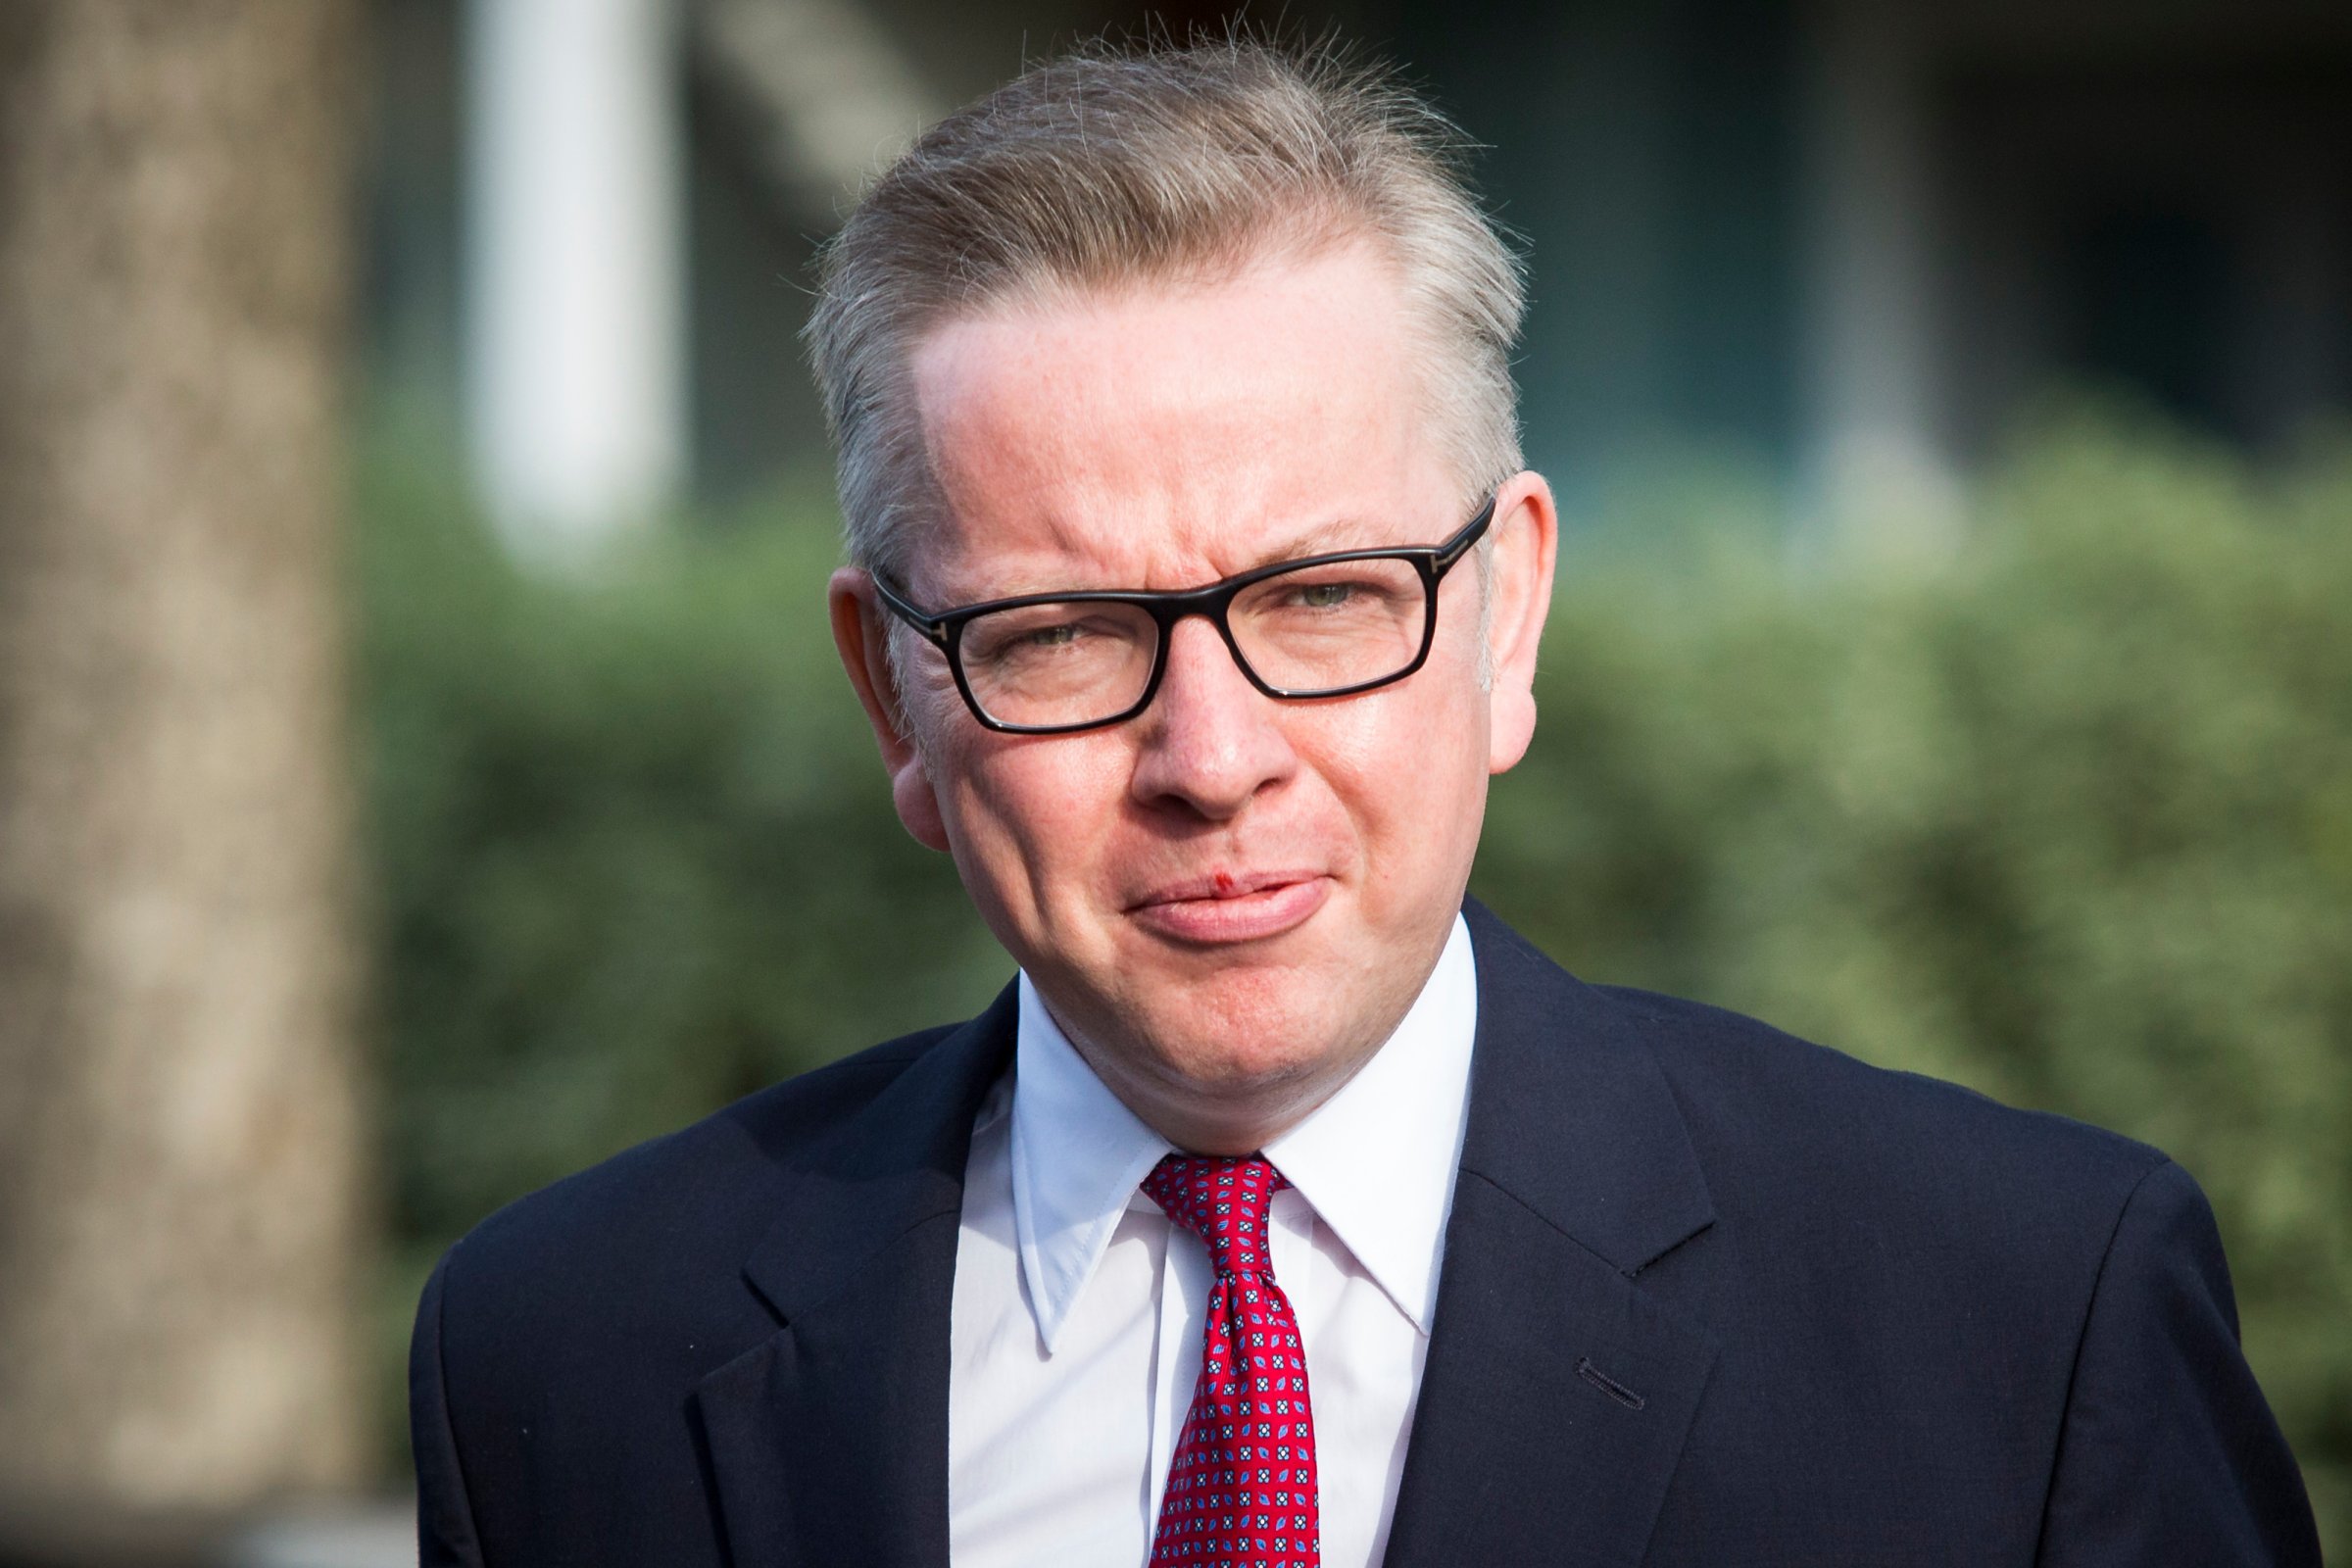 Justice Secretary and leading Brexit campaigner Michael Gove leaves his home in Kensington before announcing his intention to run to be the next Conservative Party leader and UK prime minister on June 30, 2016 in London, England.